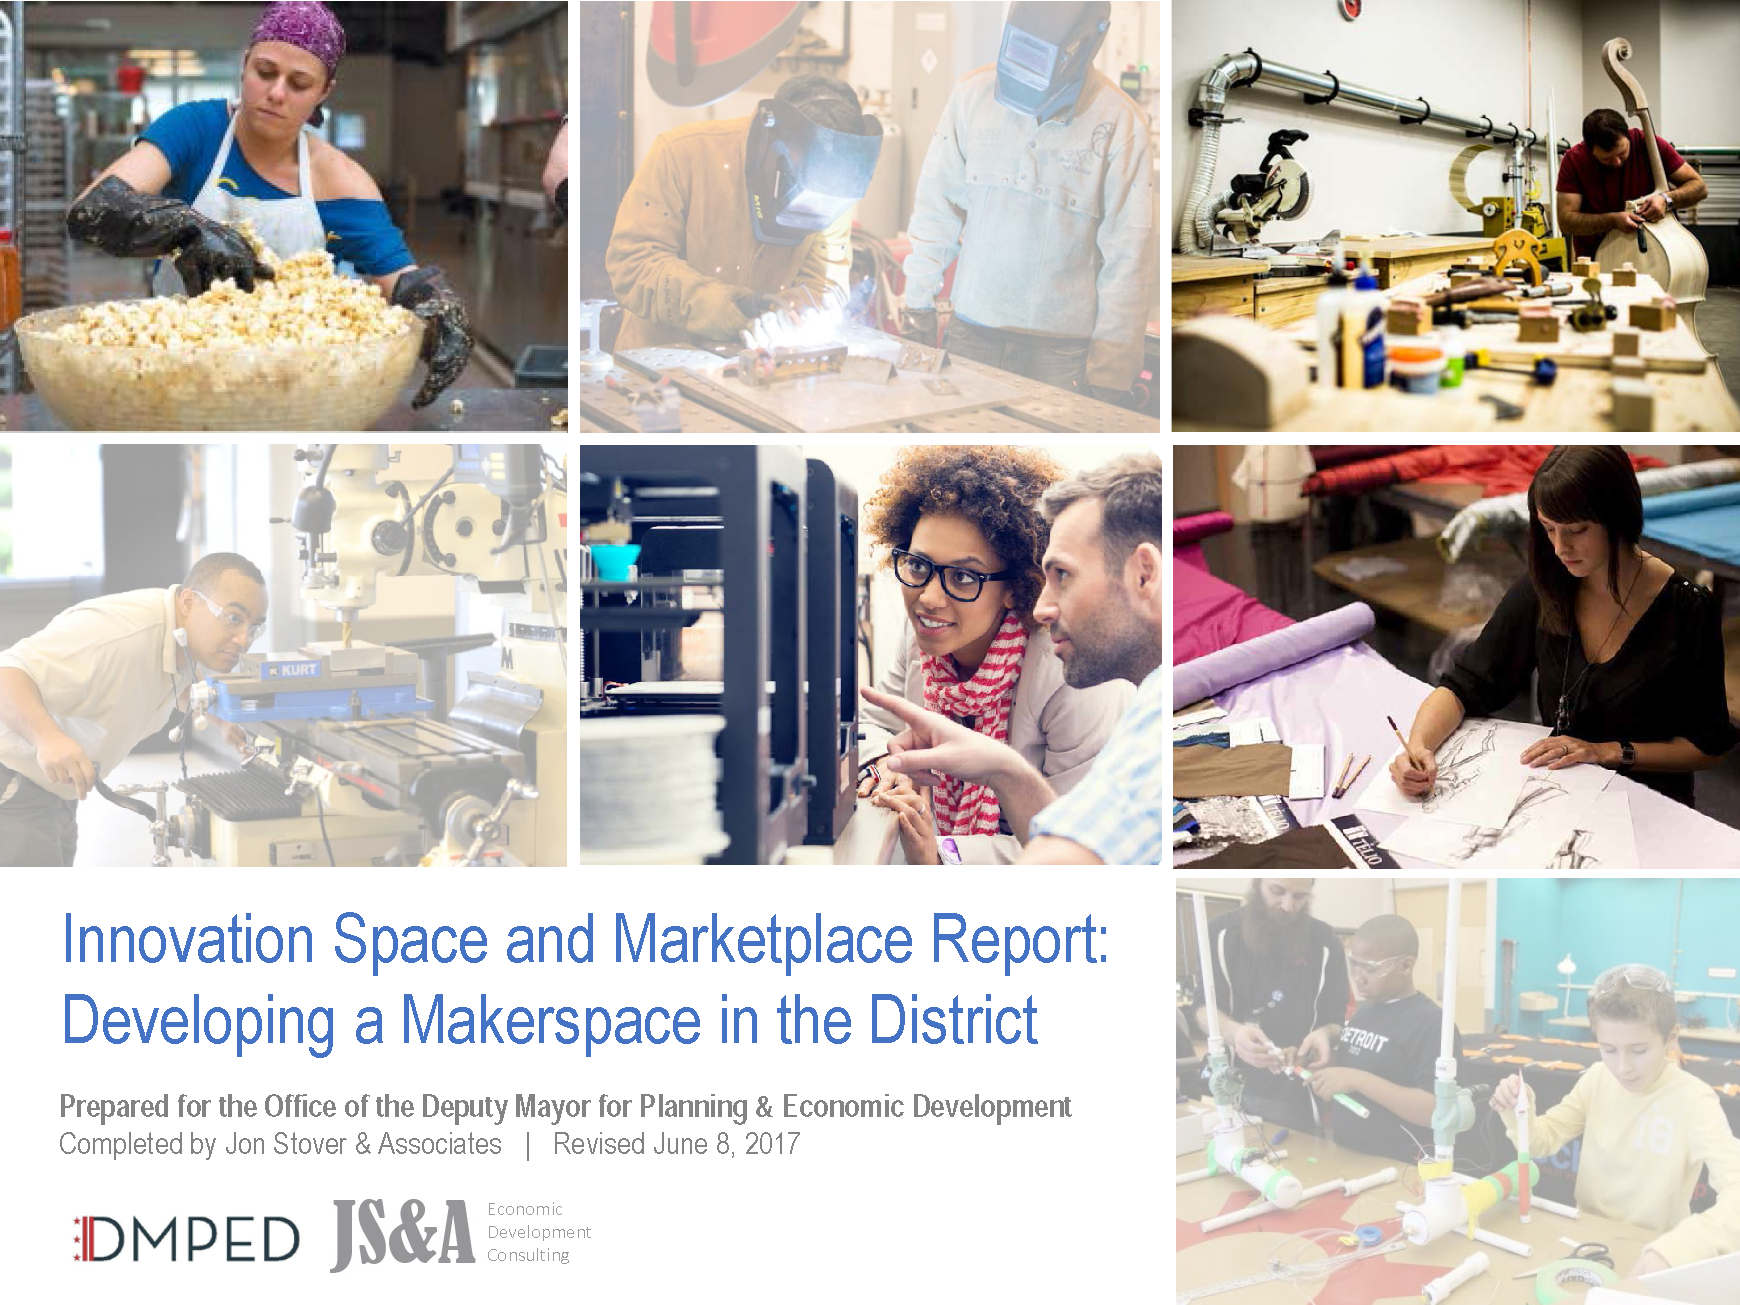 Innovation Space and Marketplace Report: Developing a Makerspace in the District